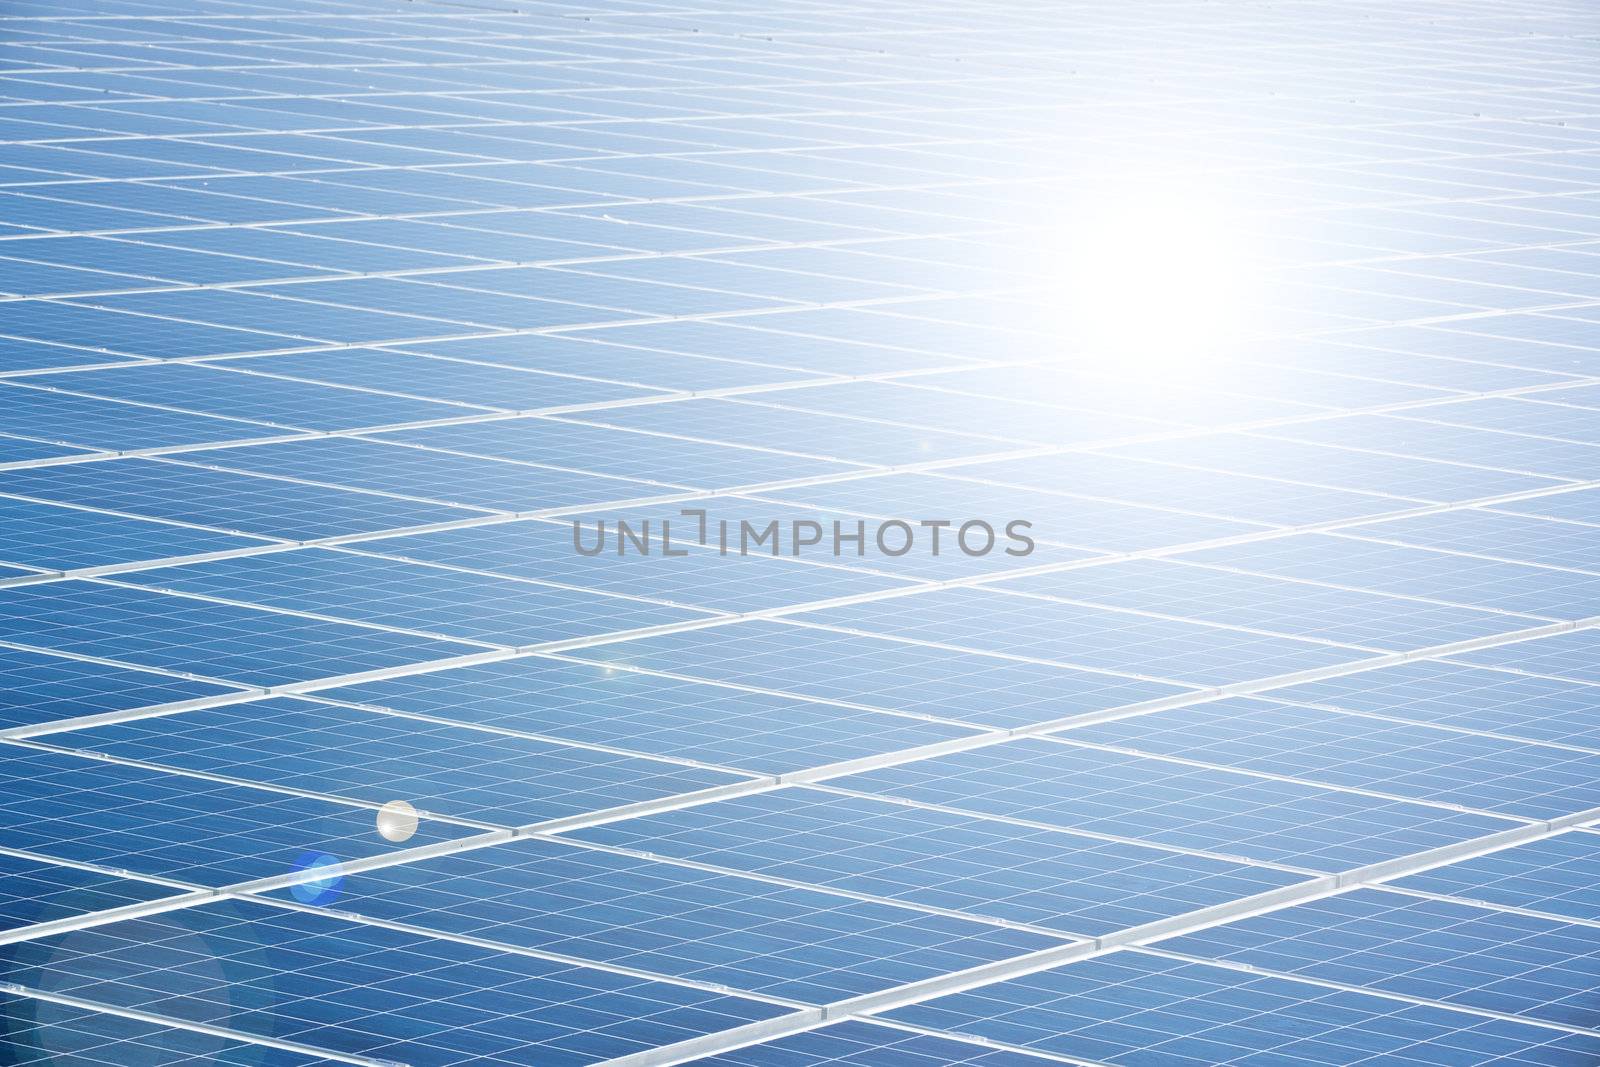 A photography of a blue solar panel